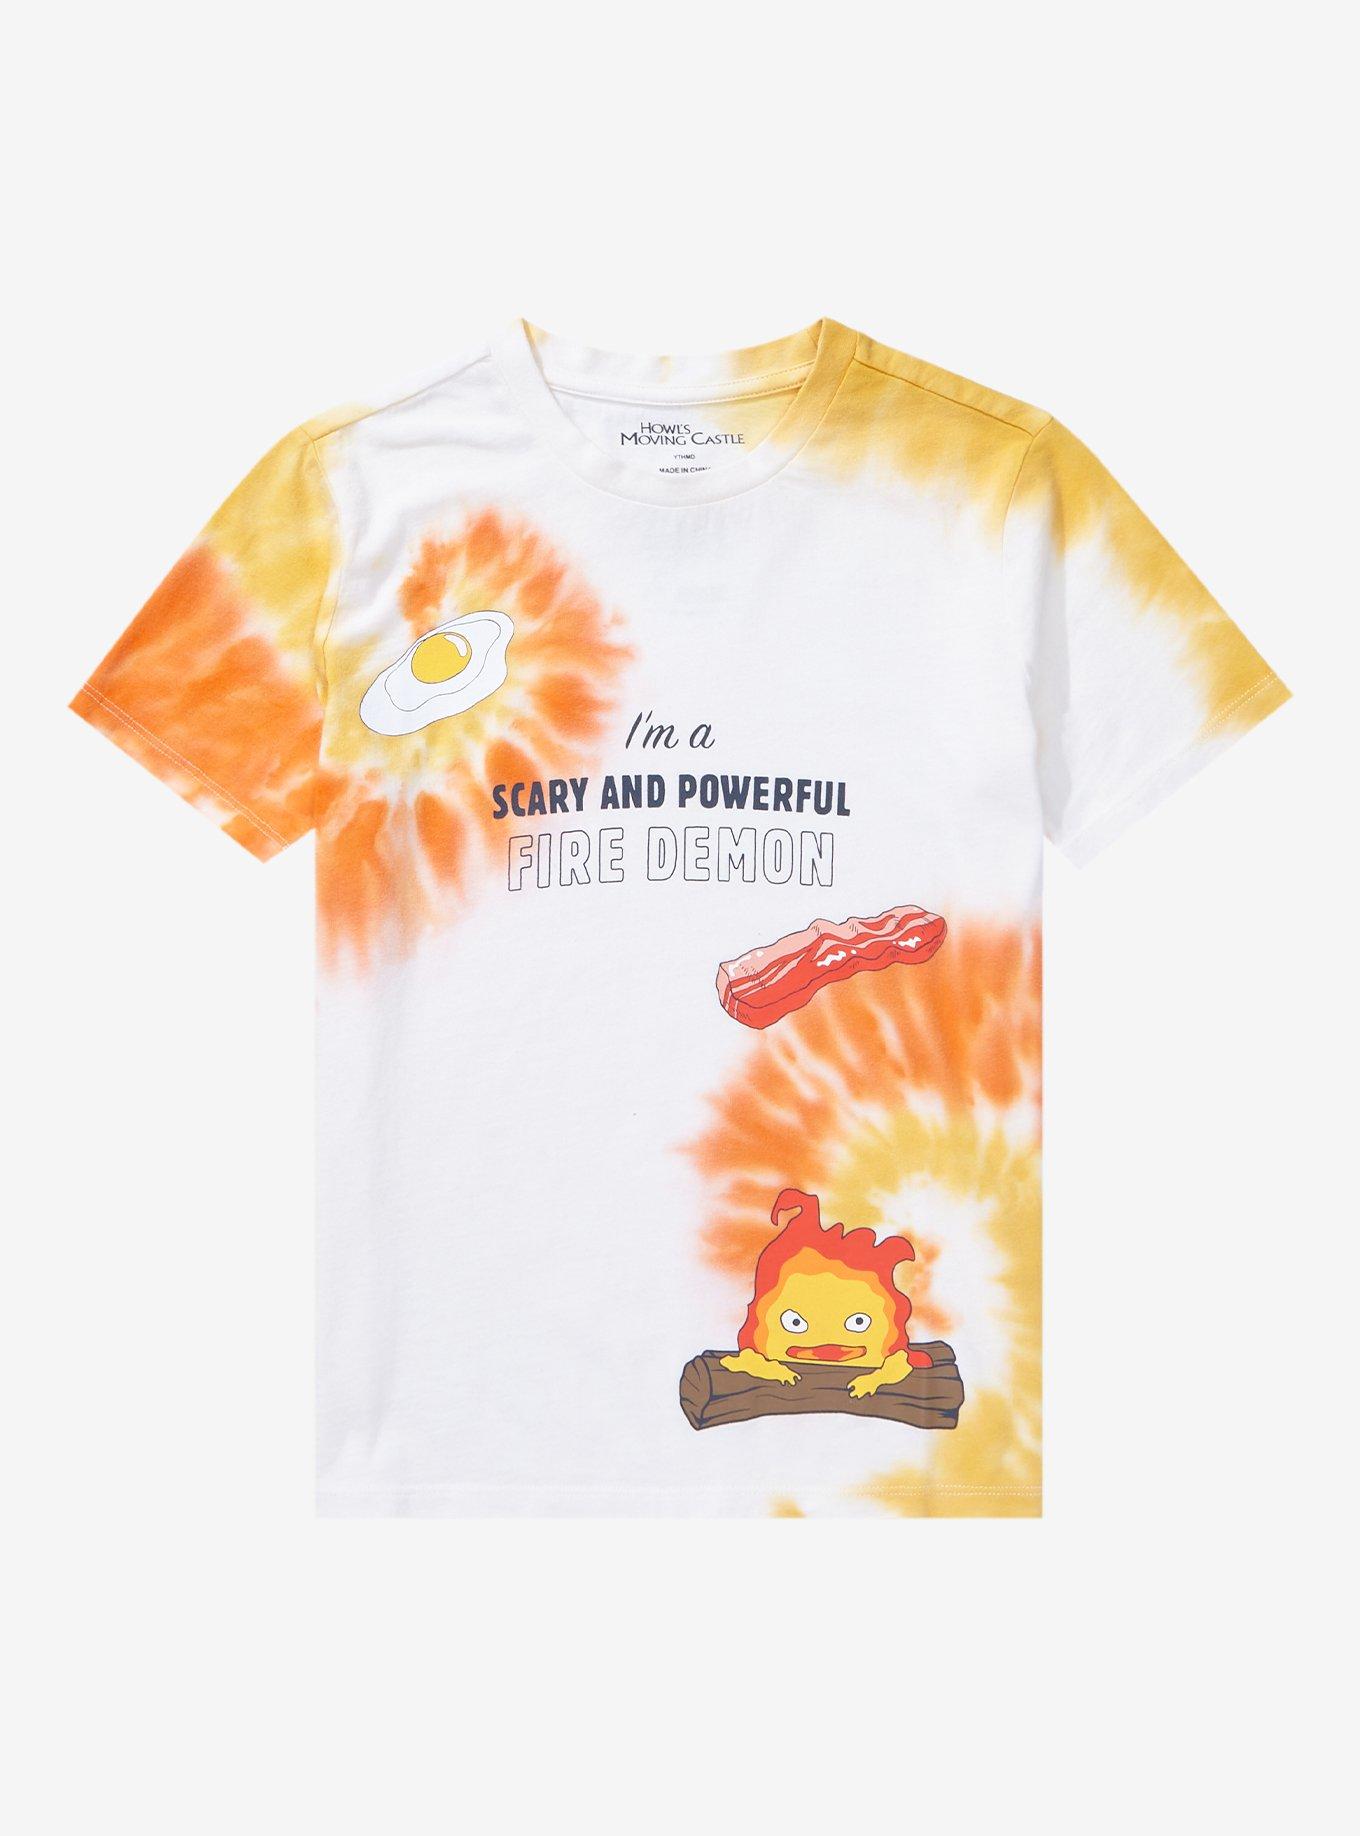 Studio Ghibli Howl's Moving Castle Calcifer Tie-Dye Youth T-Shirt - BoxLunch Exclusive, BEIGE, hi-res